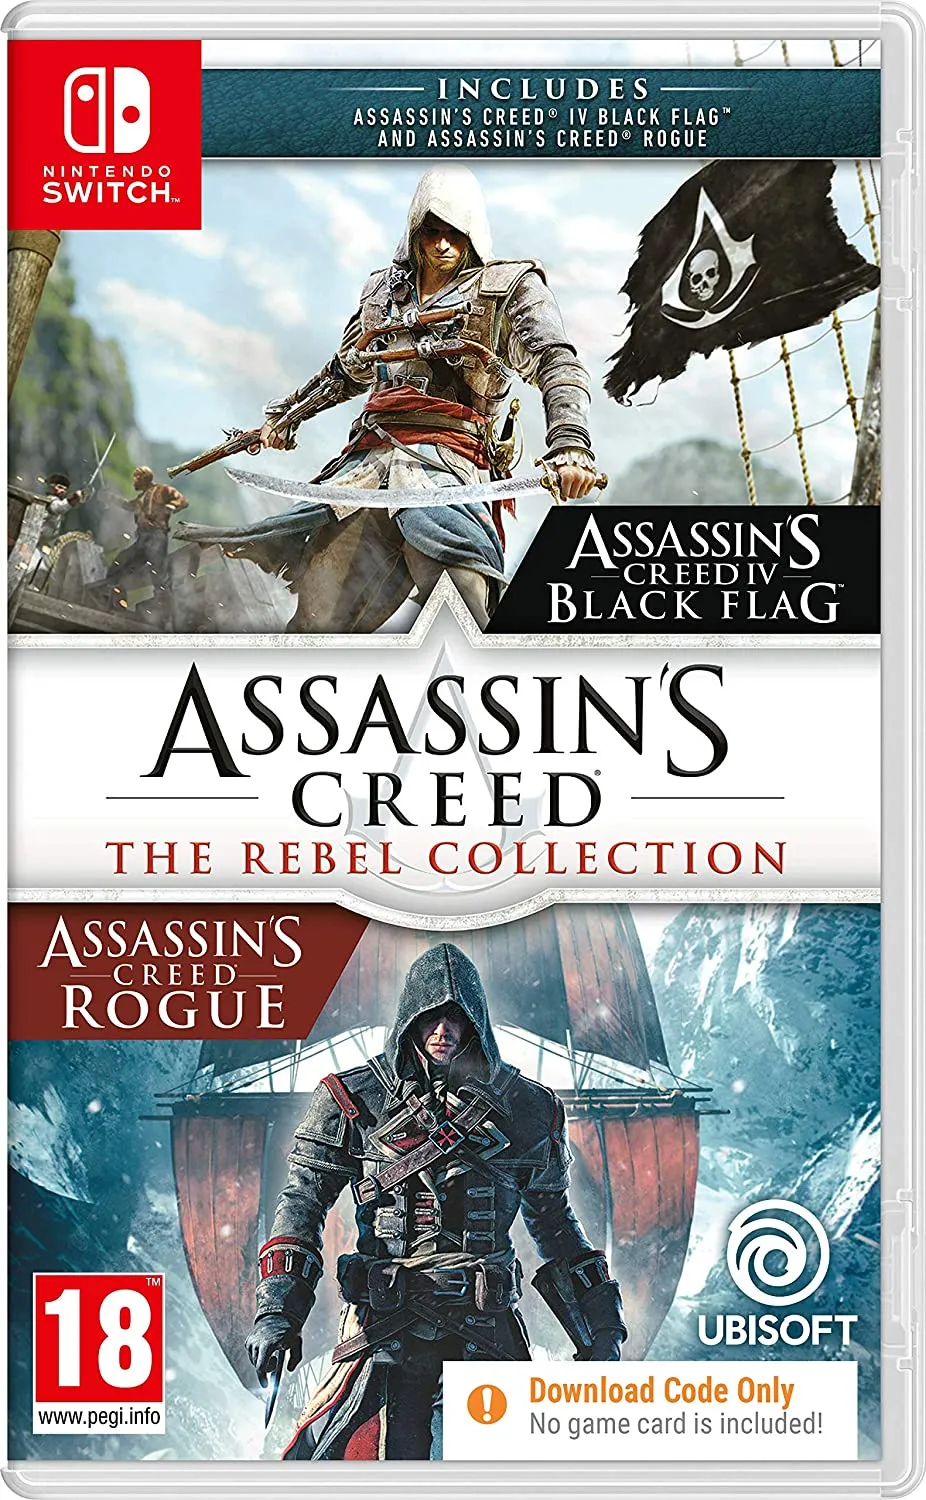 Assassin's Creed: The Rebel Collection för Nintendo Switch.